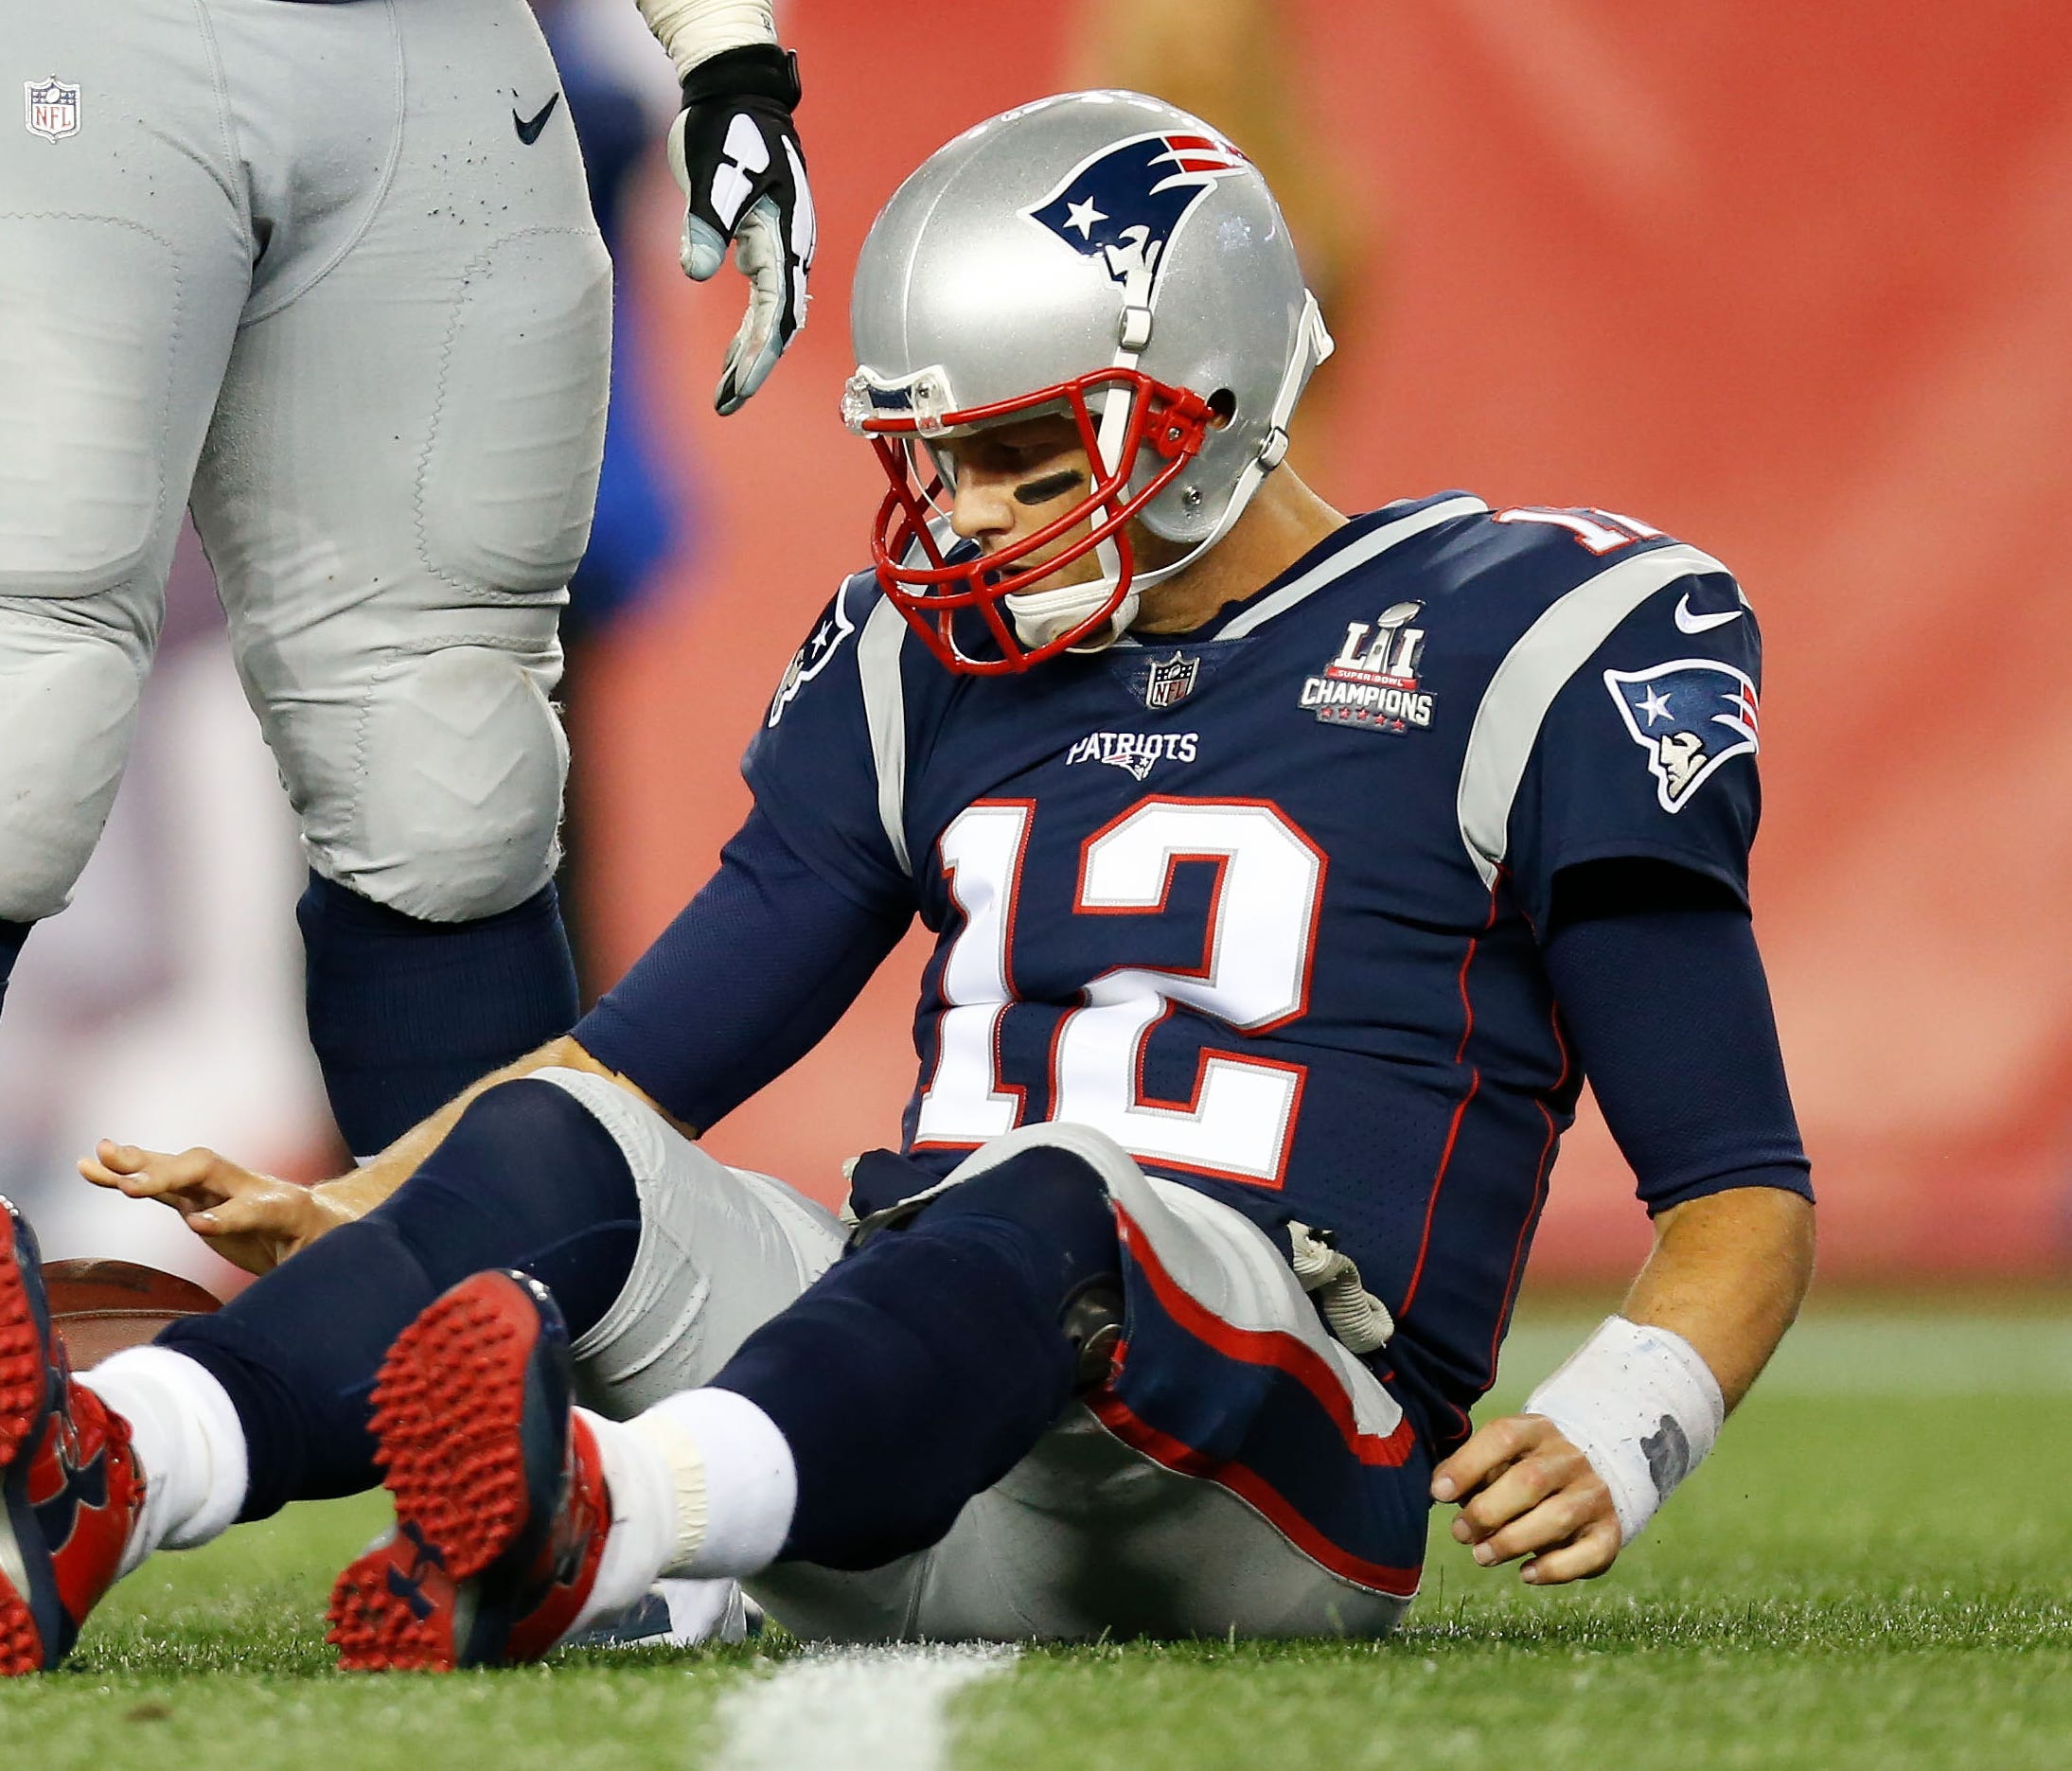 New England Patriots quarterback Tom Brady lies on the field after being sacked in the fourth quarter against the Kansas City Chiefs.